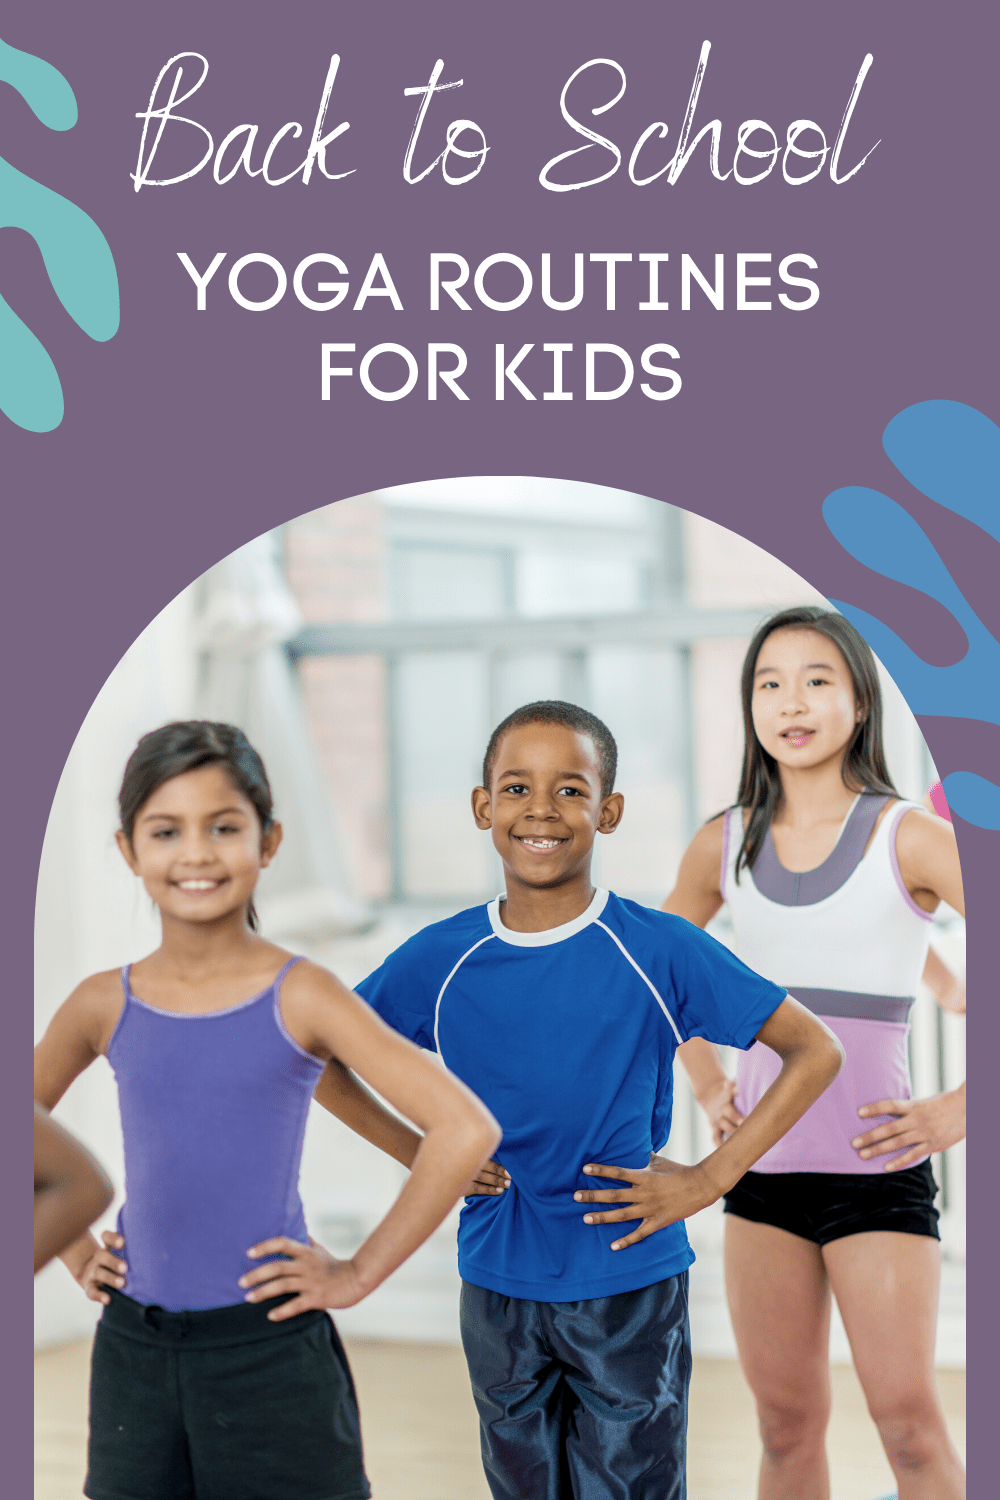 Back to School Yoga and Mindfulness Routines for Kids : Kumarah